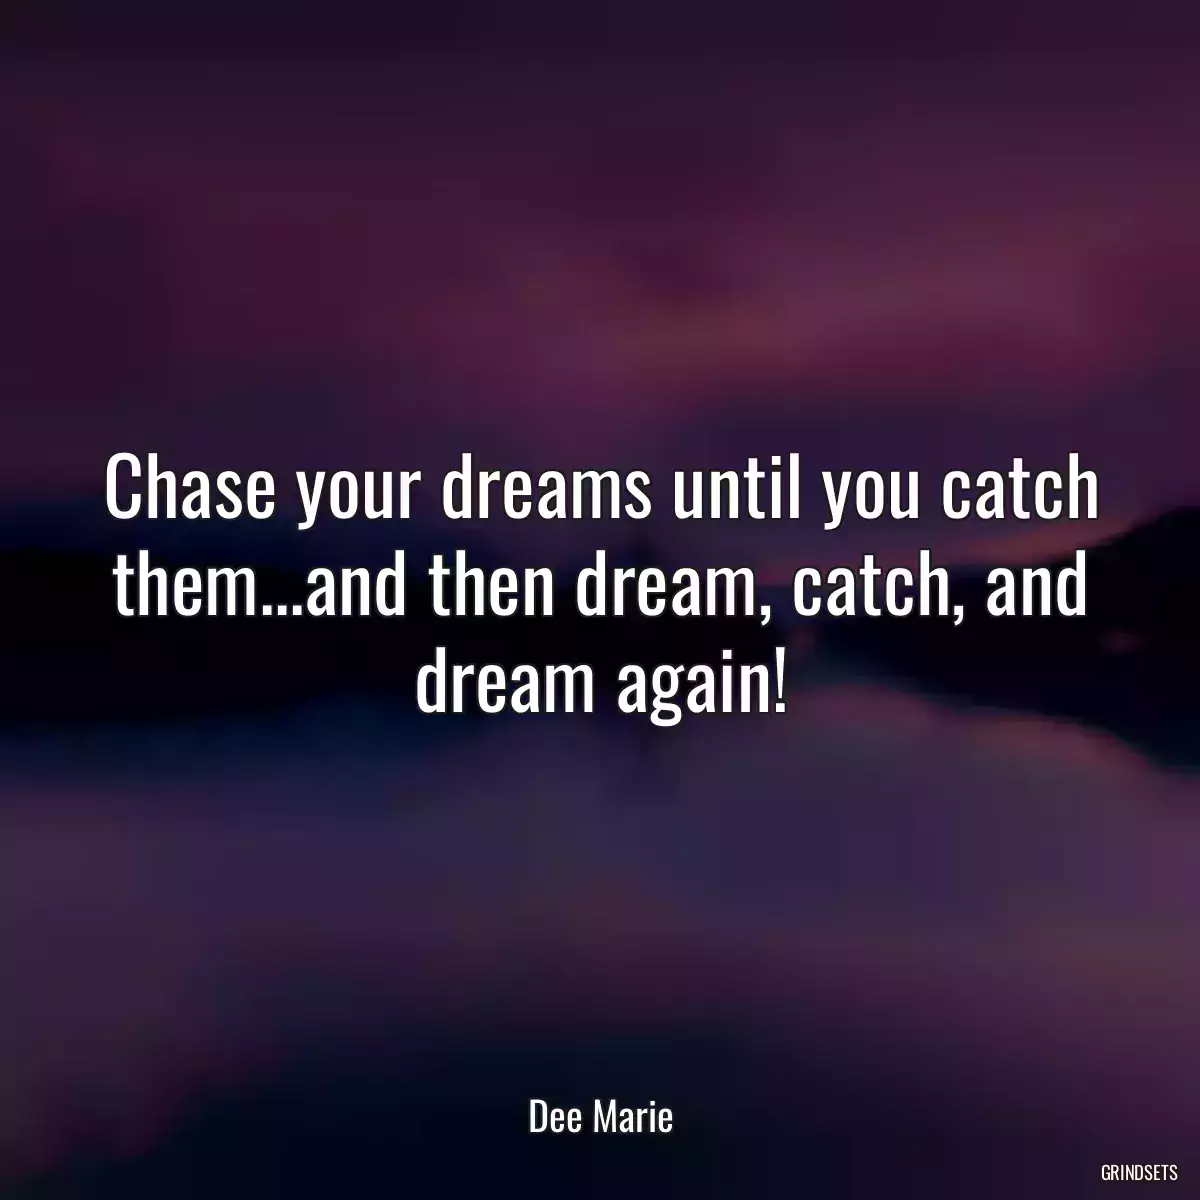 Chase your dreams until you catch them...and then dream, catch, and dream again!